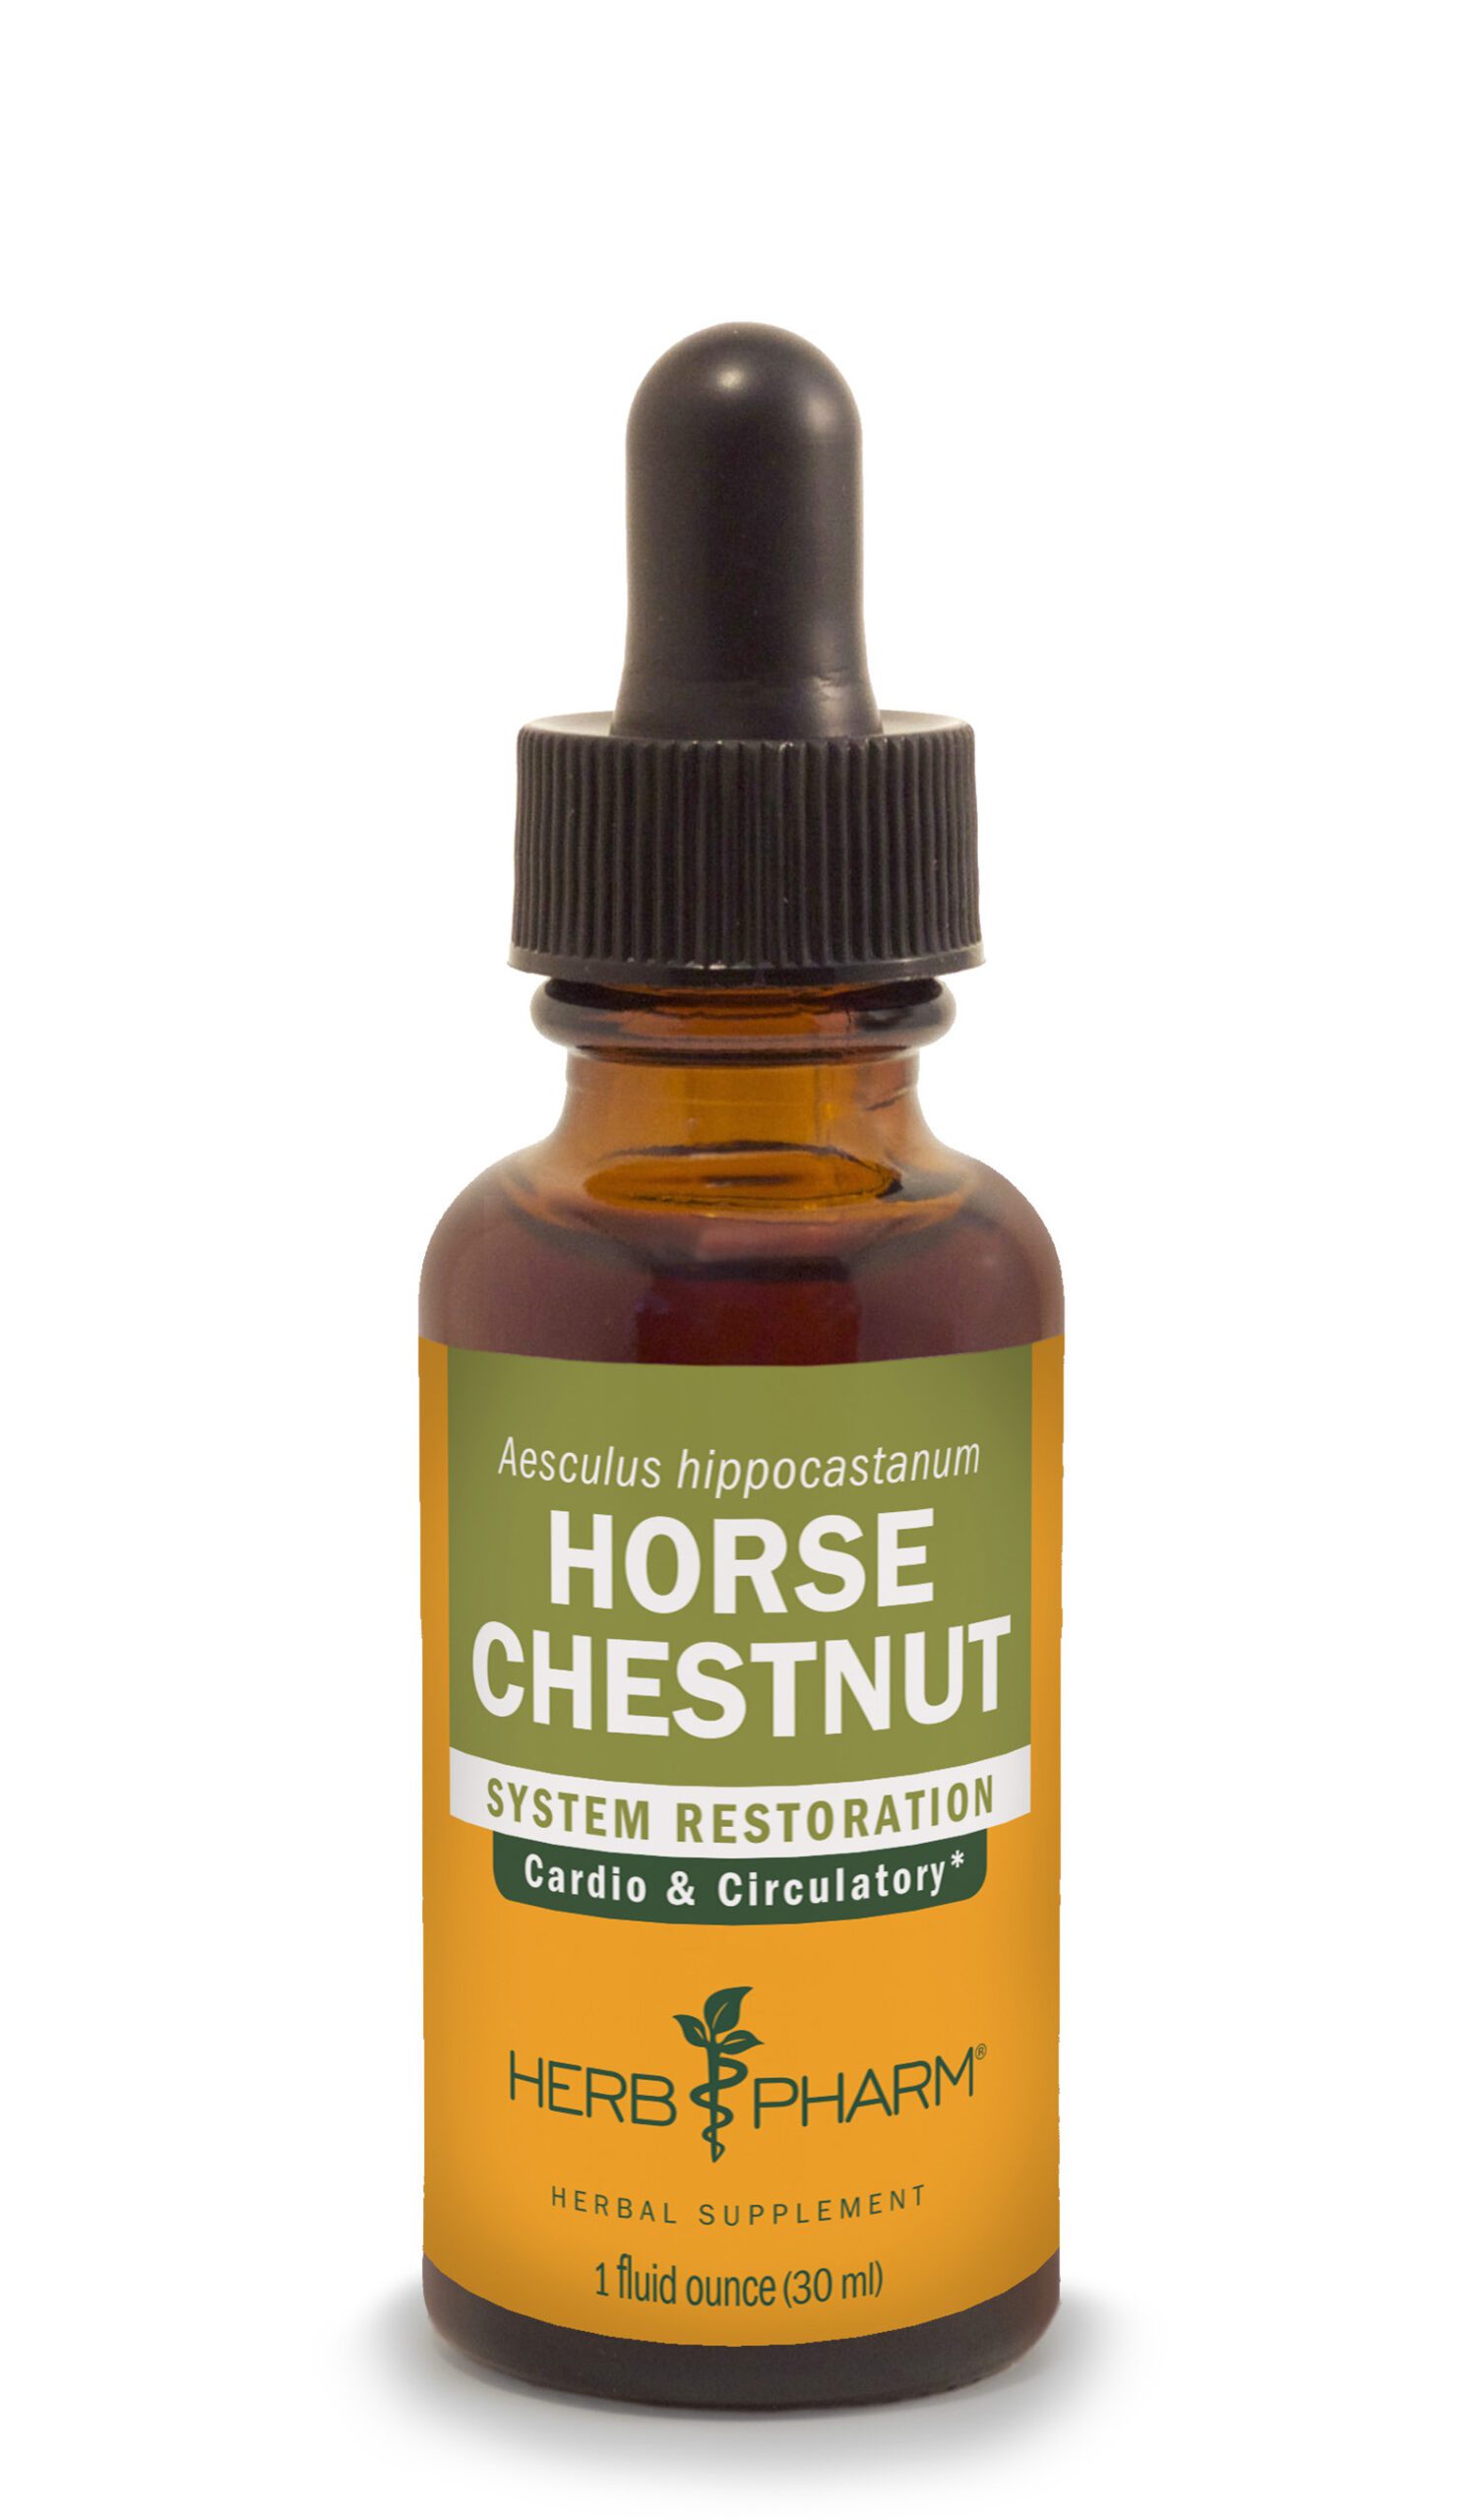 Product Listing Image for Herb Pharm Horse Chestnut Tincture 1oz